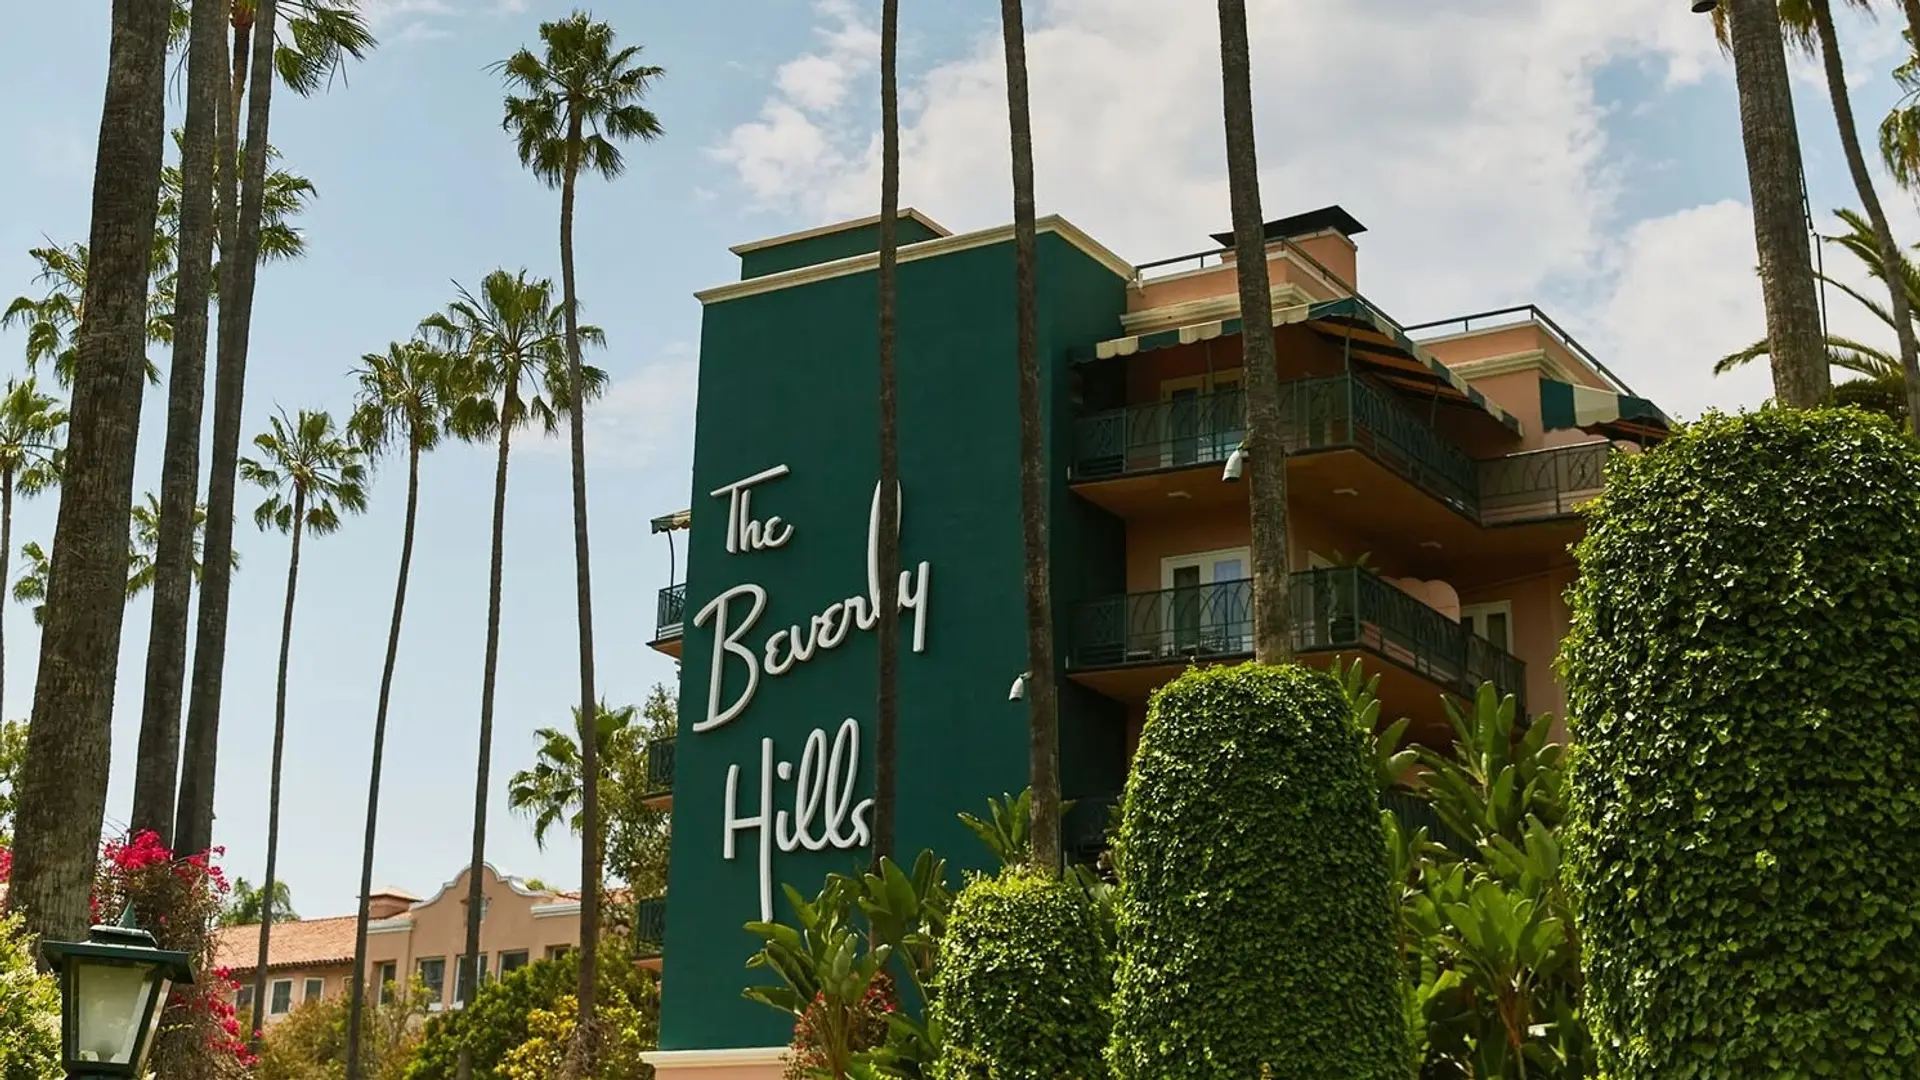 Hotel review Location' - The Beverly Hills Hotel - 1